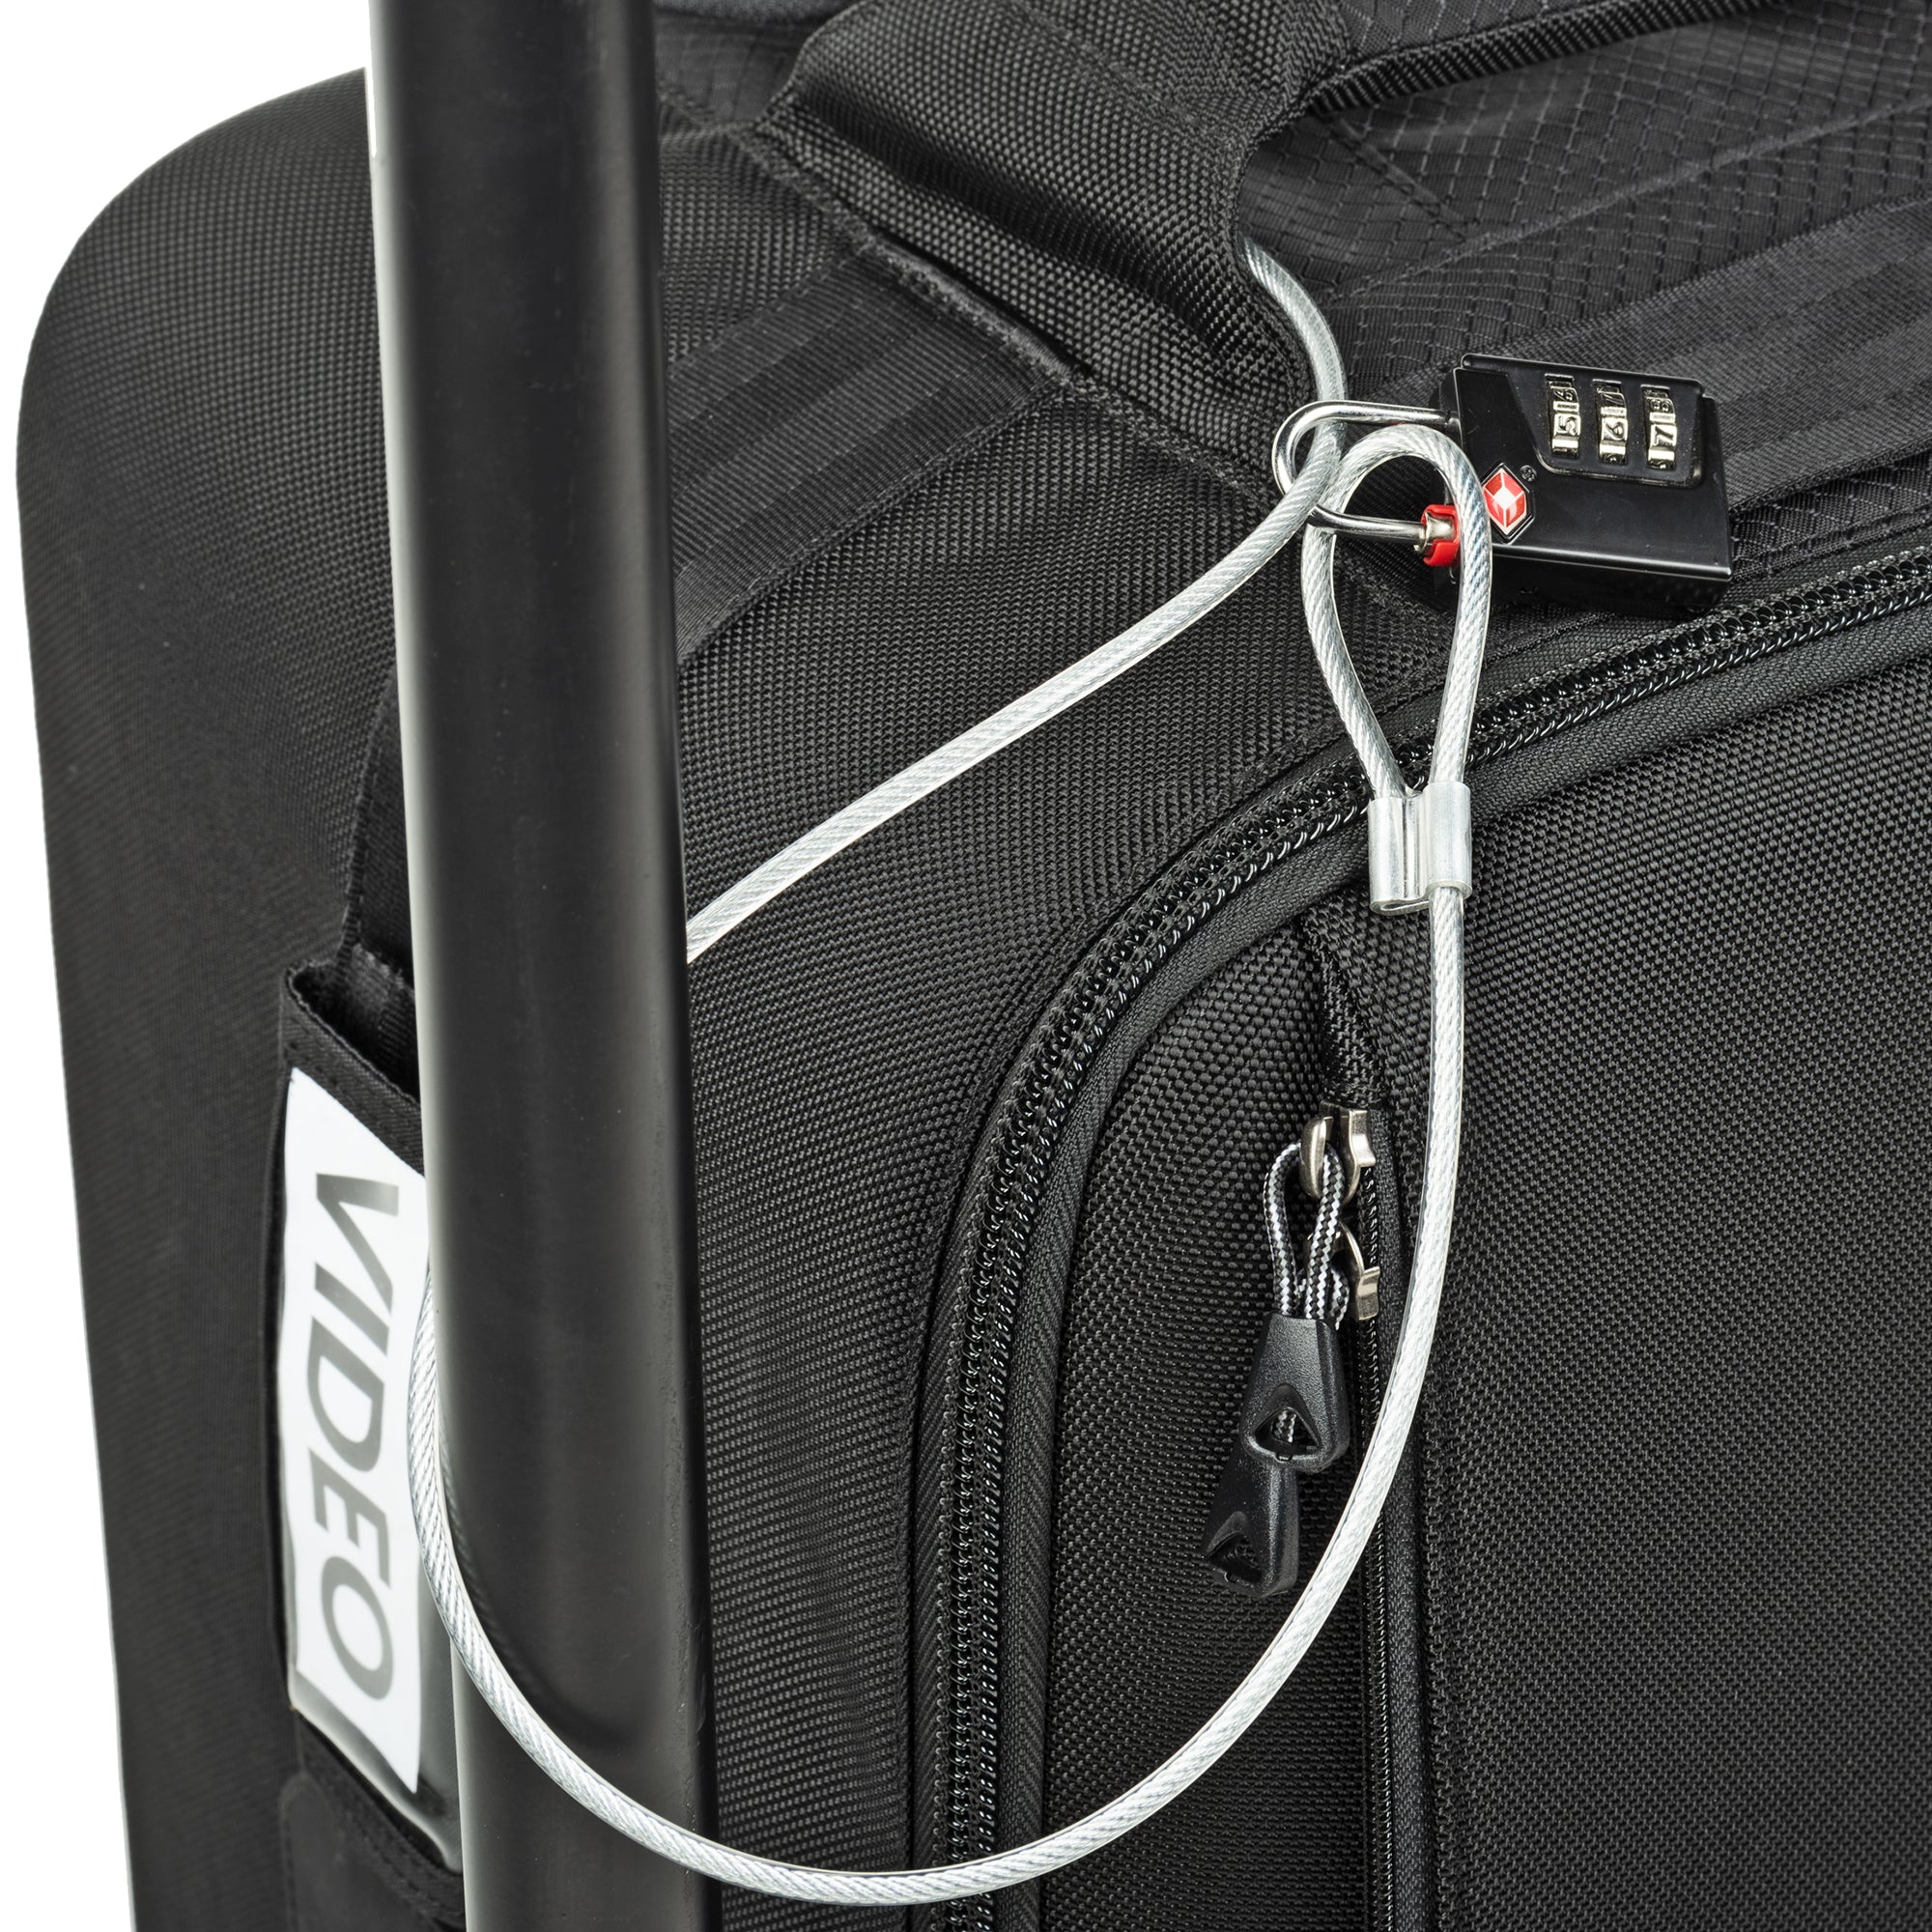 Lock the main compartment and secure your bag with the included lock and cable (TSA lock included)